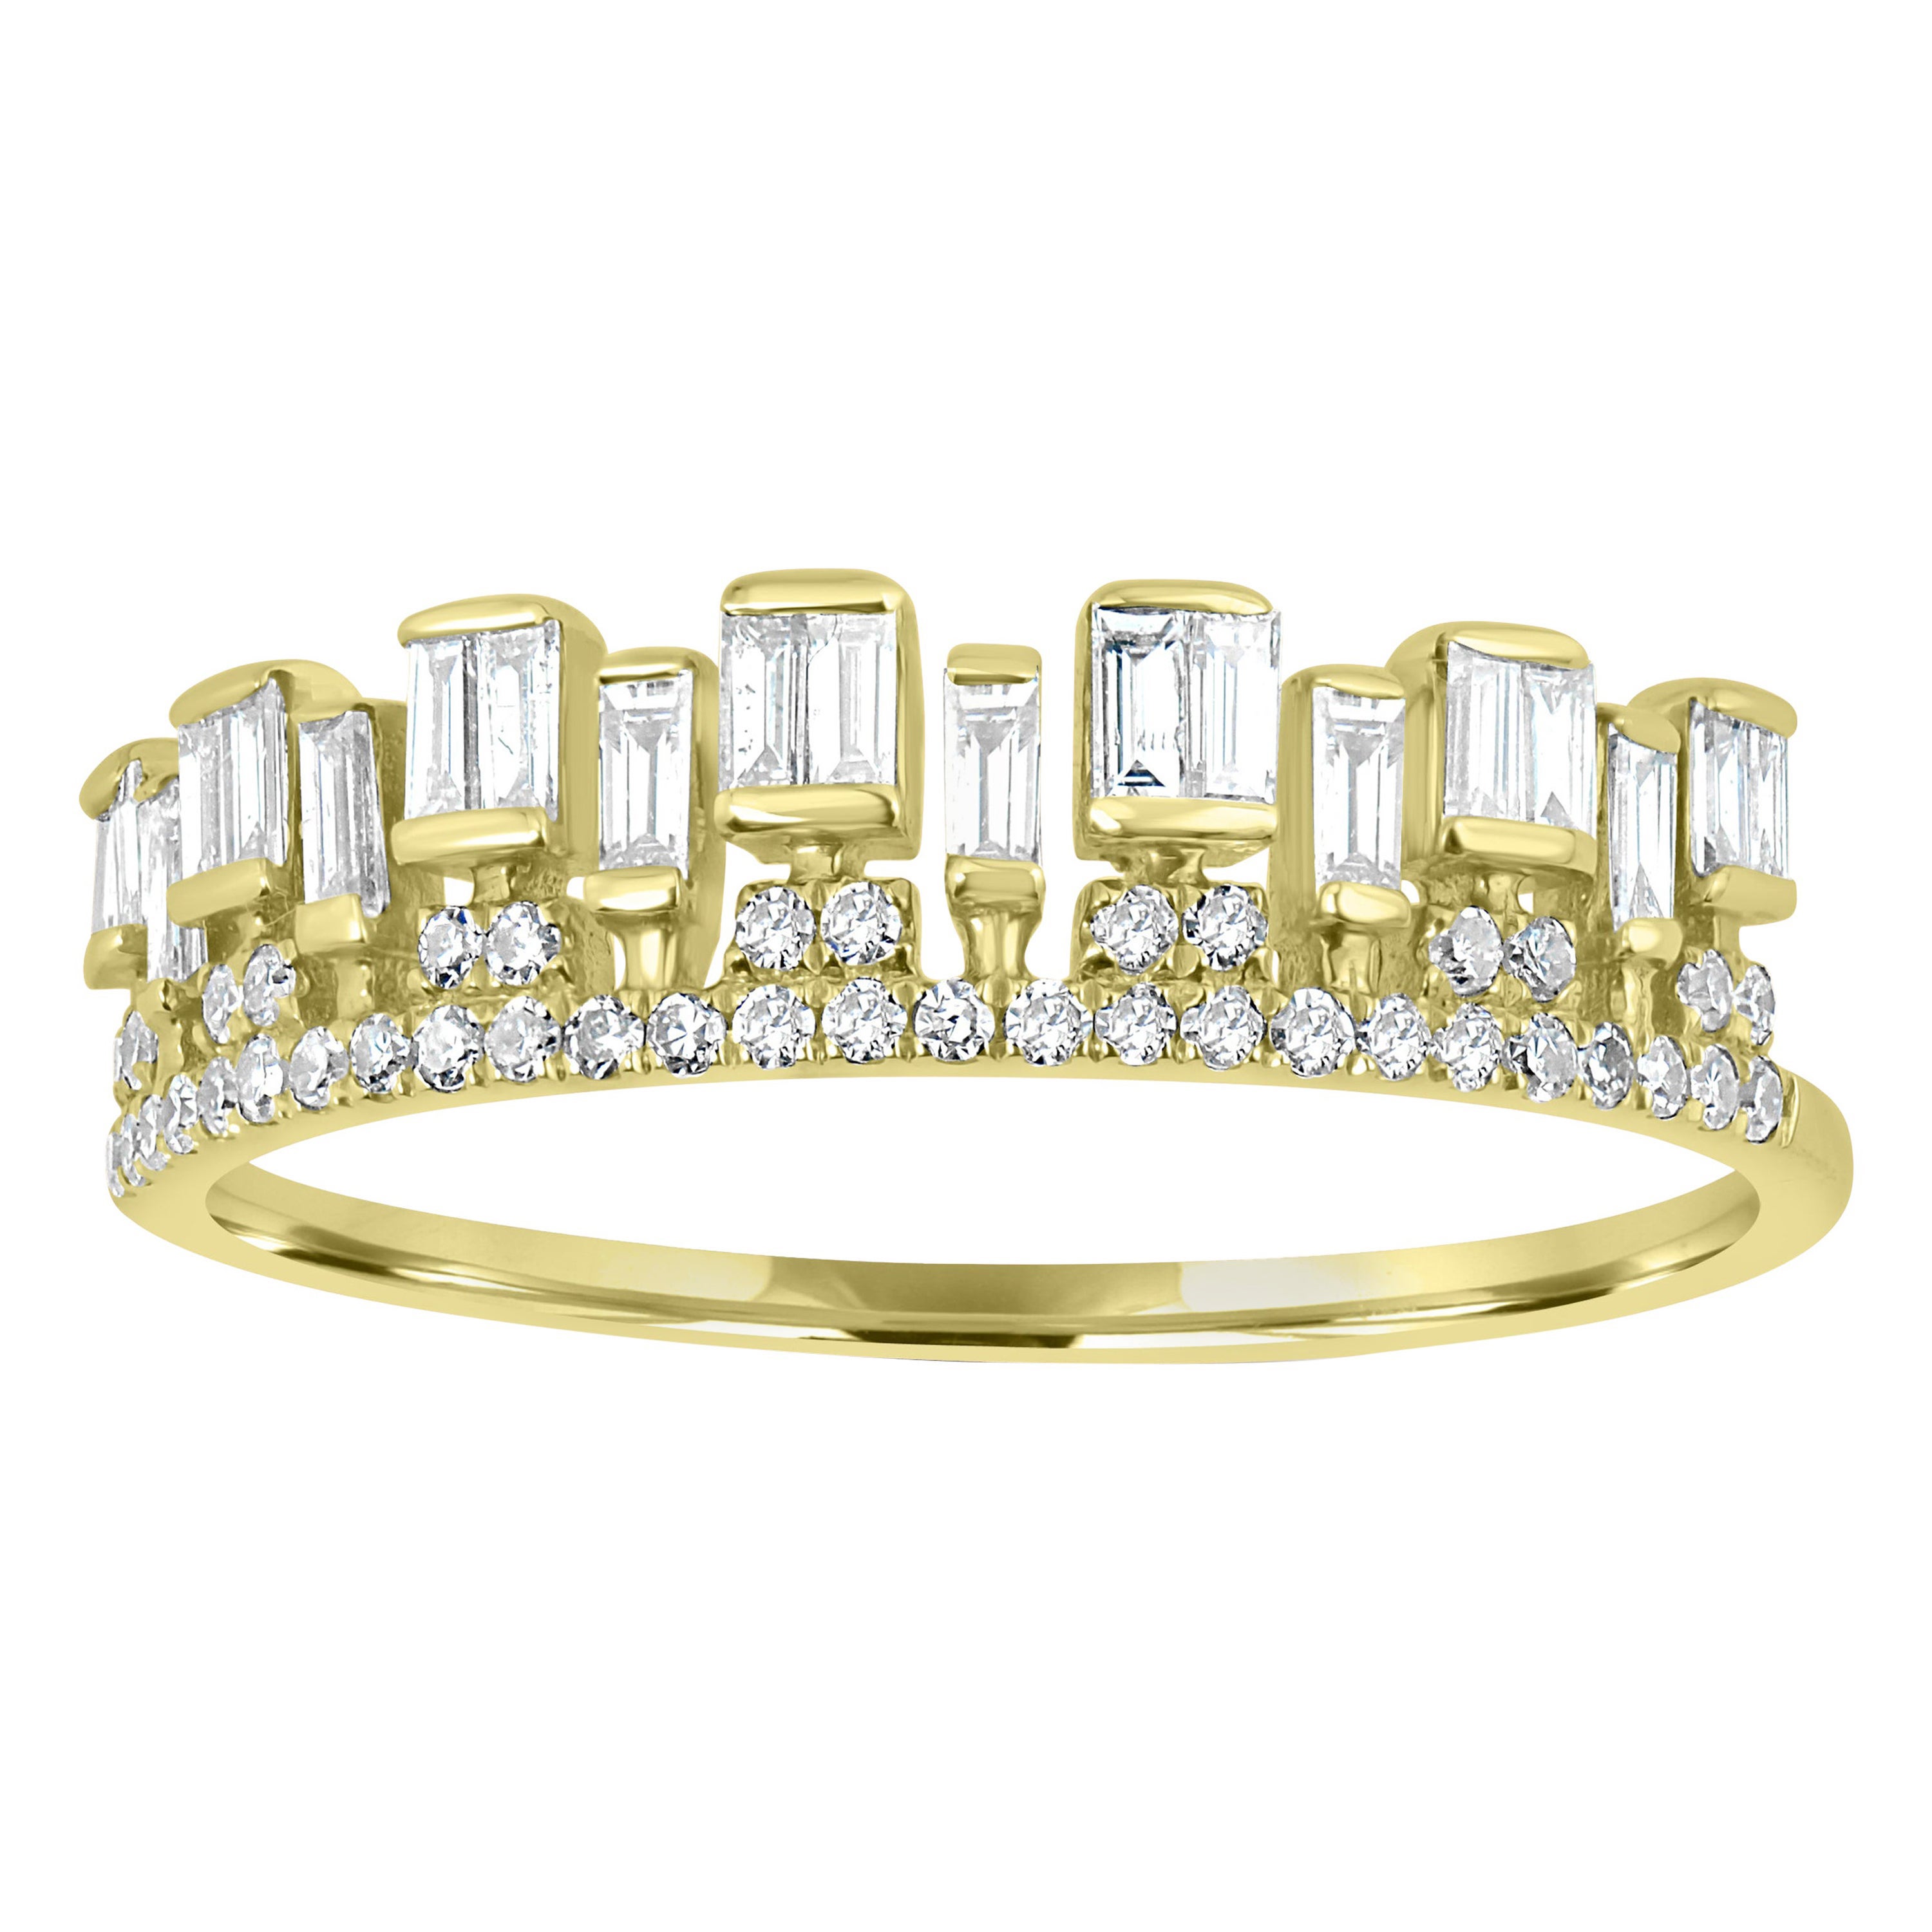 Luxle 0.39 Ct. T.W Diamond Crown Ring in 14k Yellow Gold For Sale